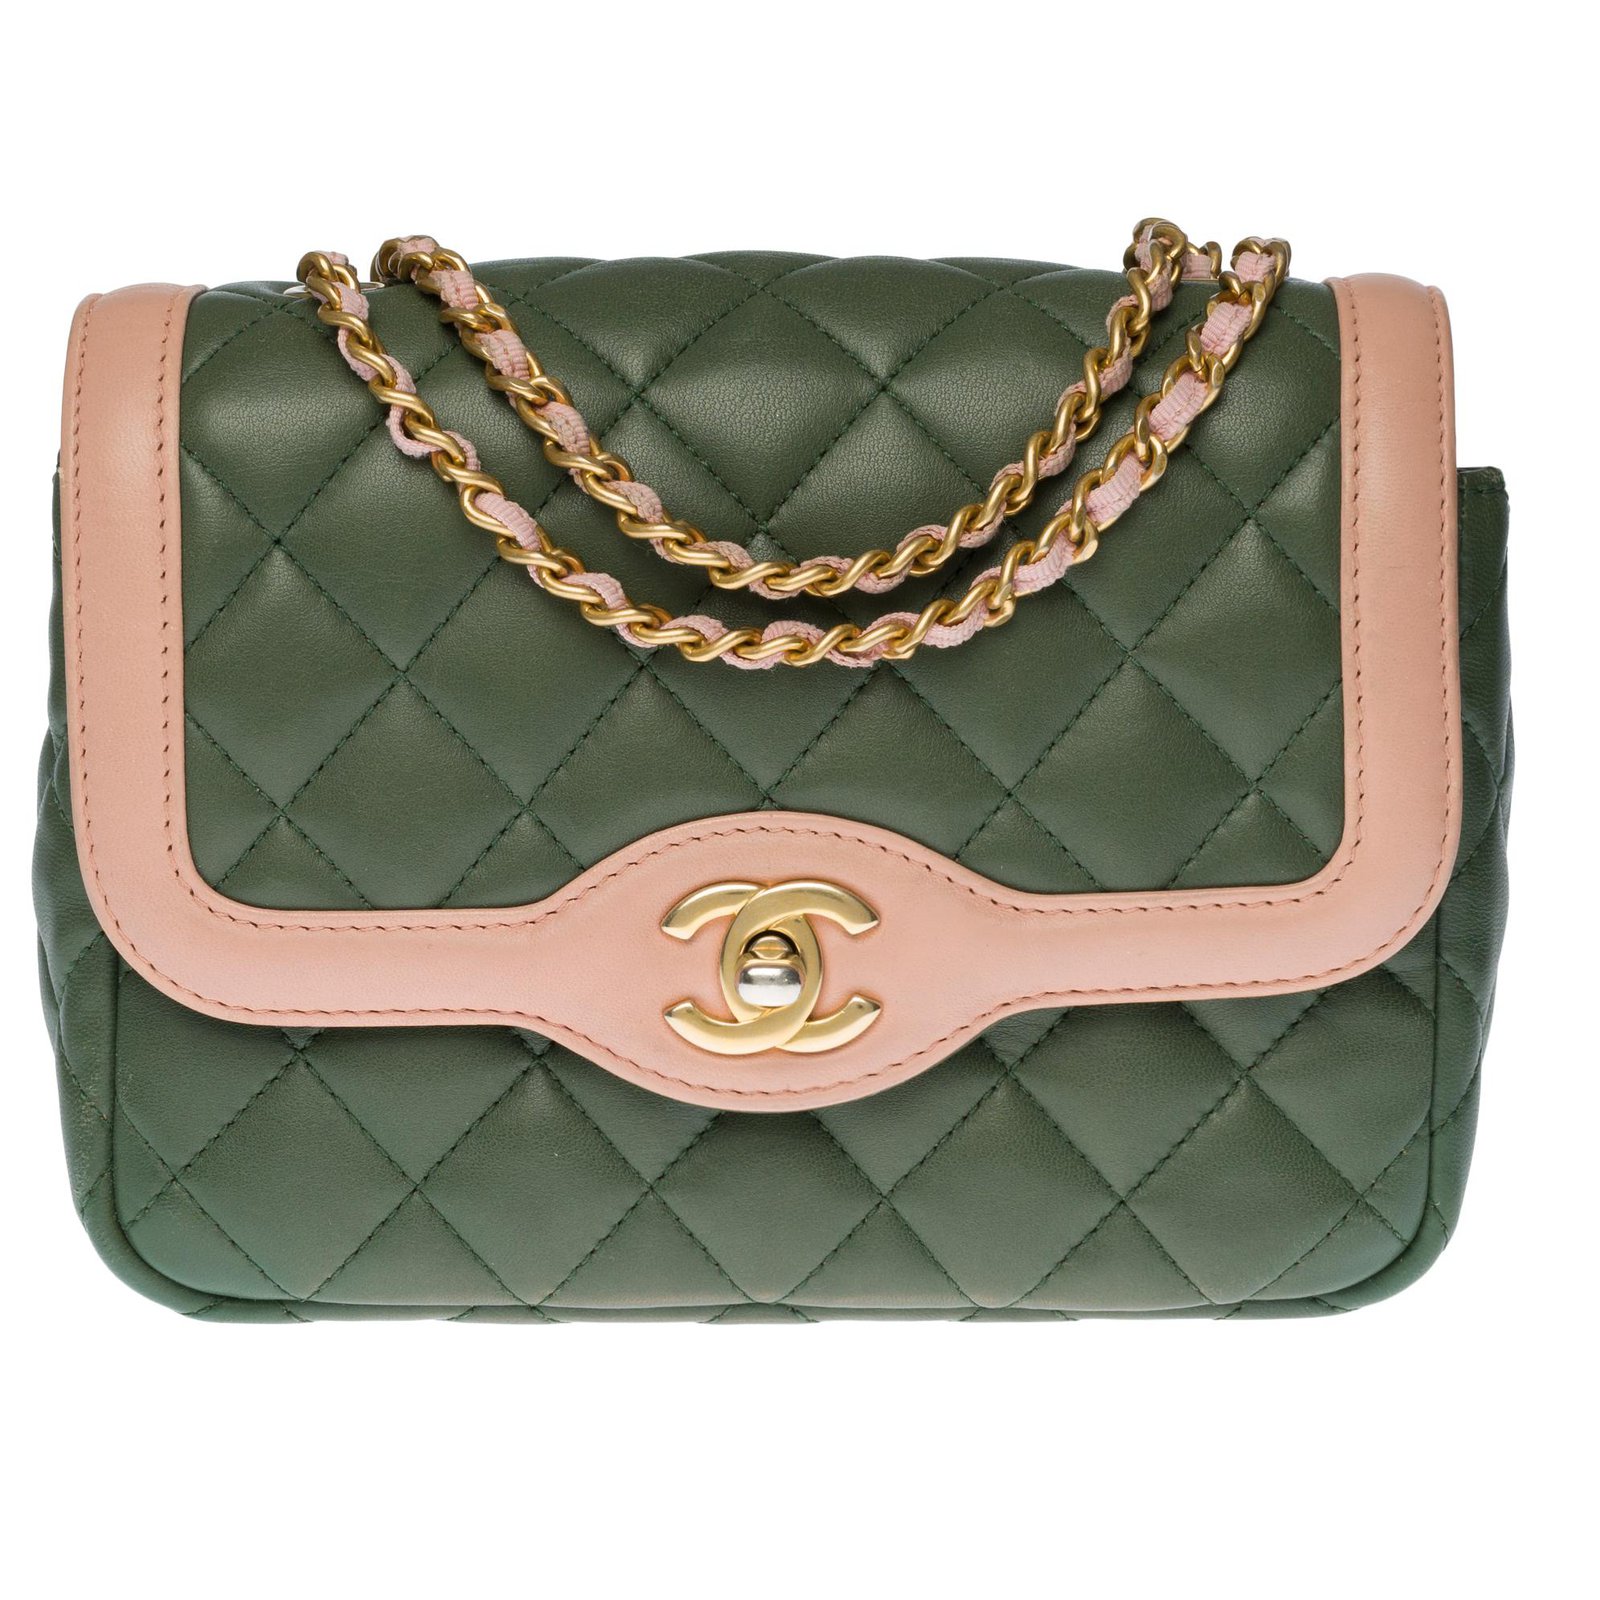 Splendid and Rare two-tone Chanel Diana Mini bag in green and pink